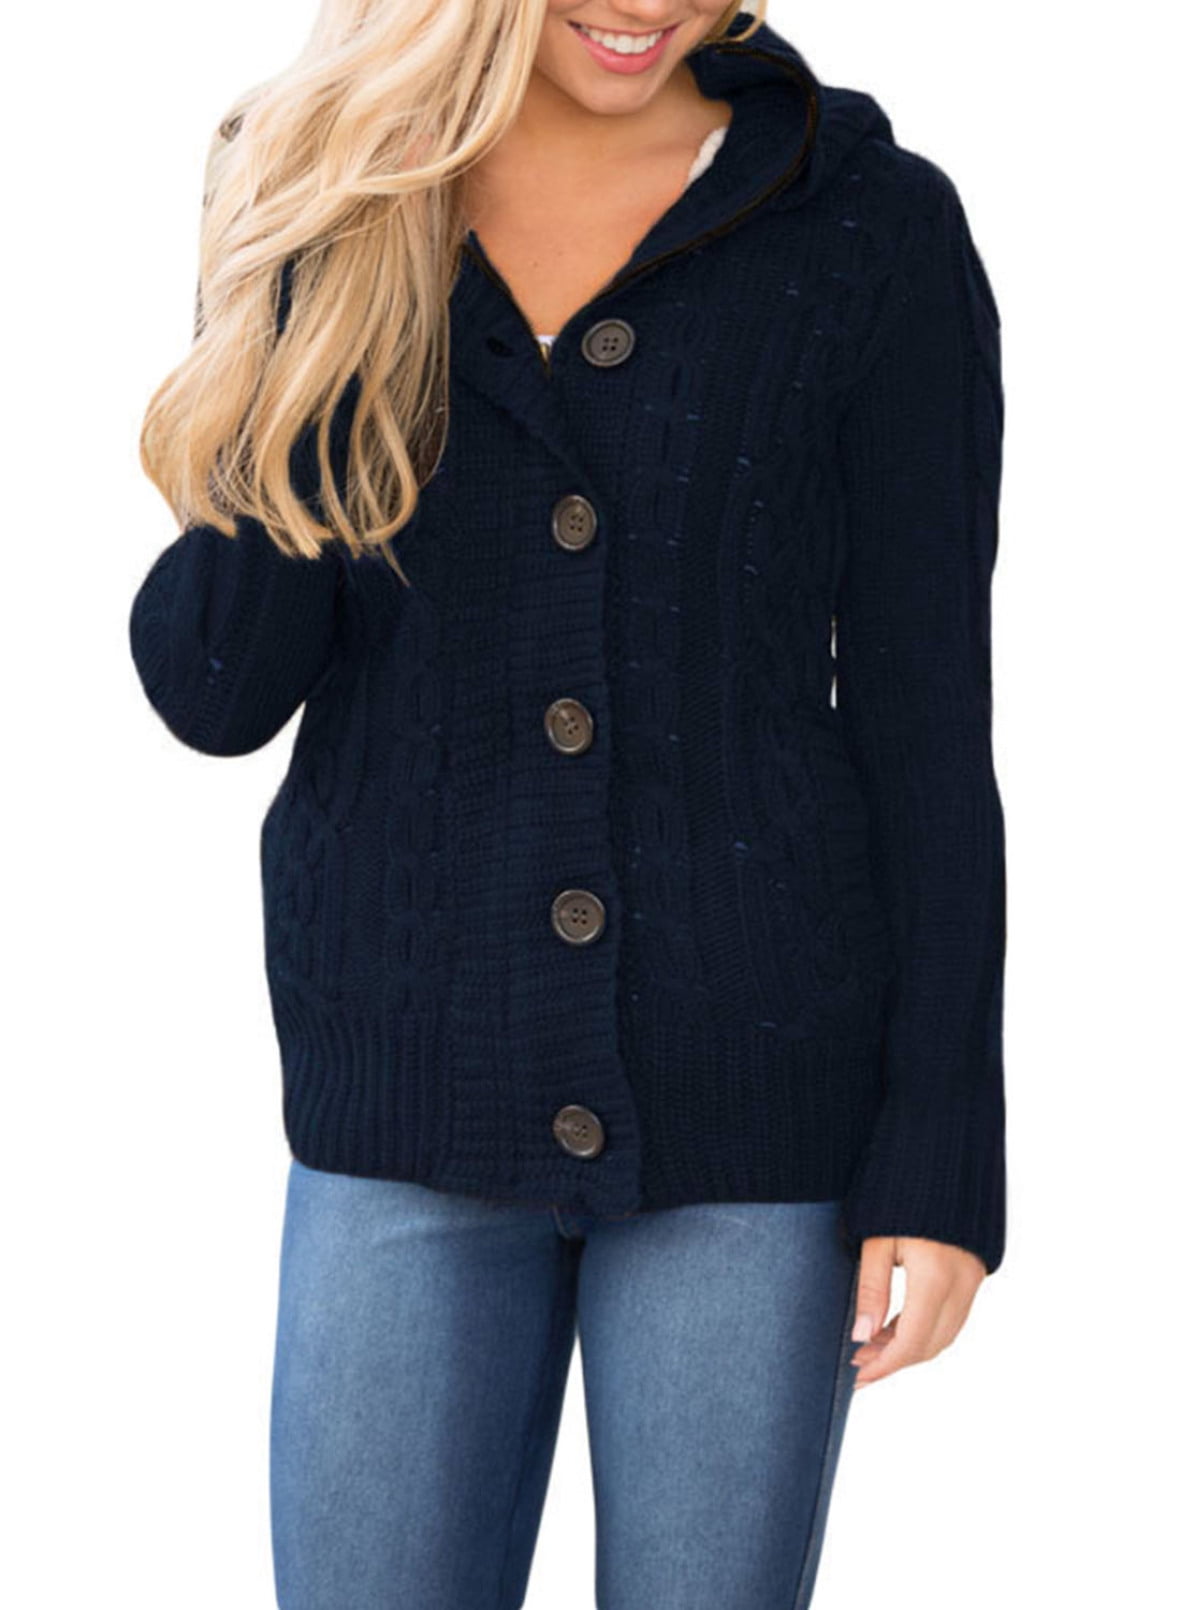 Aleumdr Womens Hooded Cardigans Casual Long Sleeve Button Up Cable Knit Sweater Coat Outwear with Pockets S-XXL